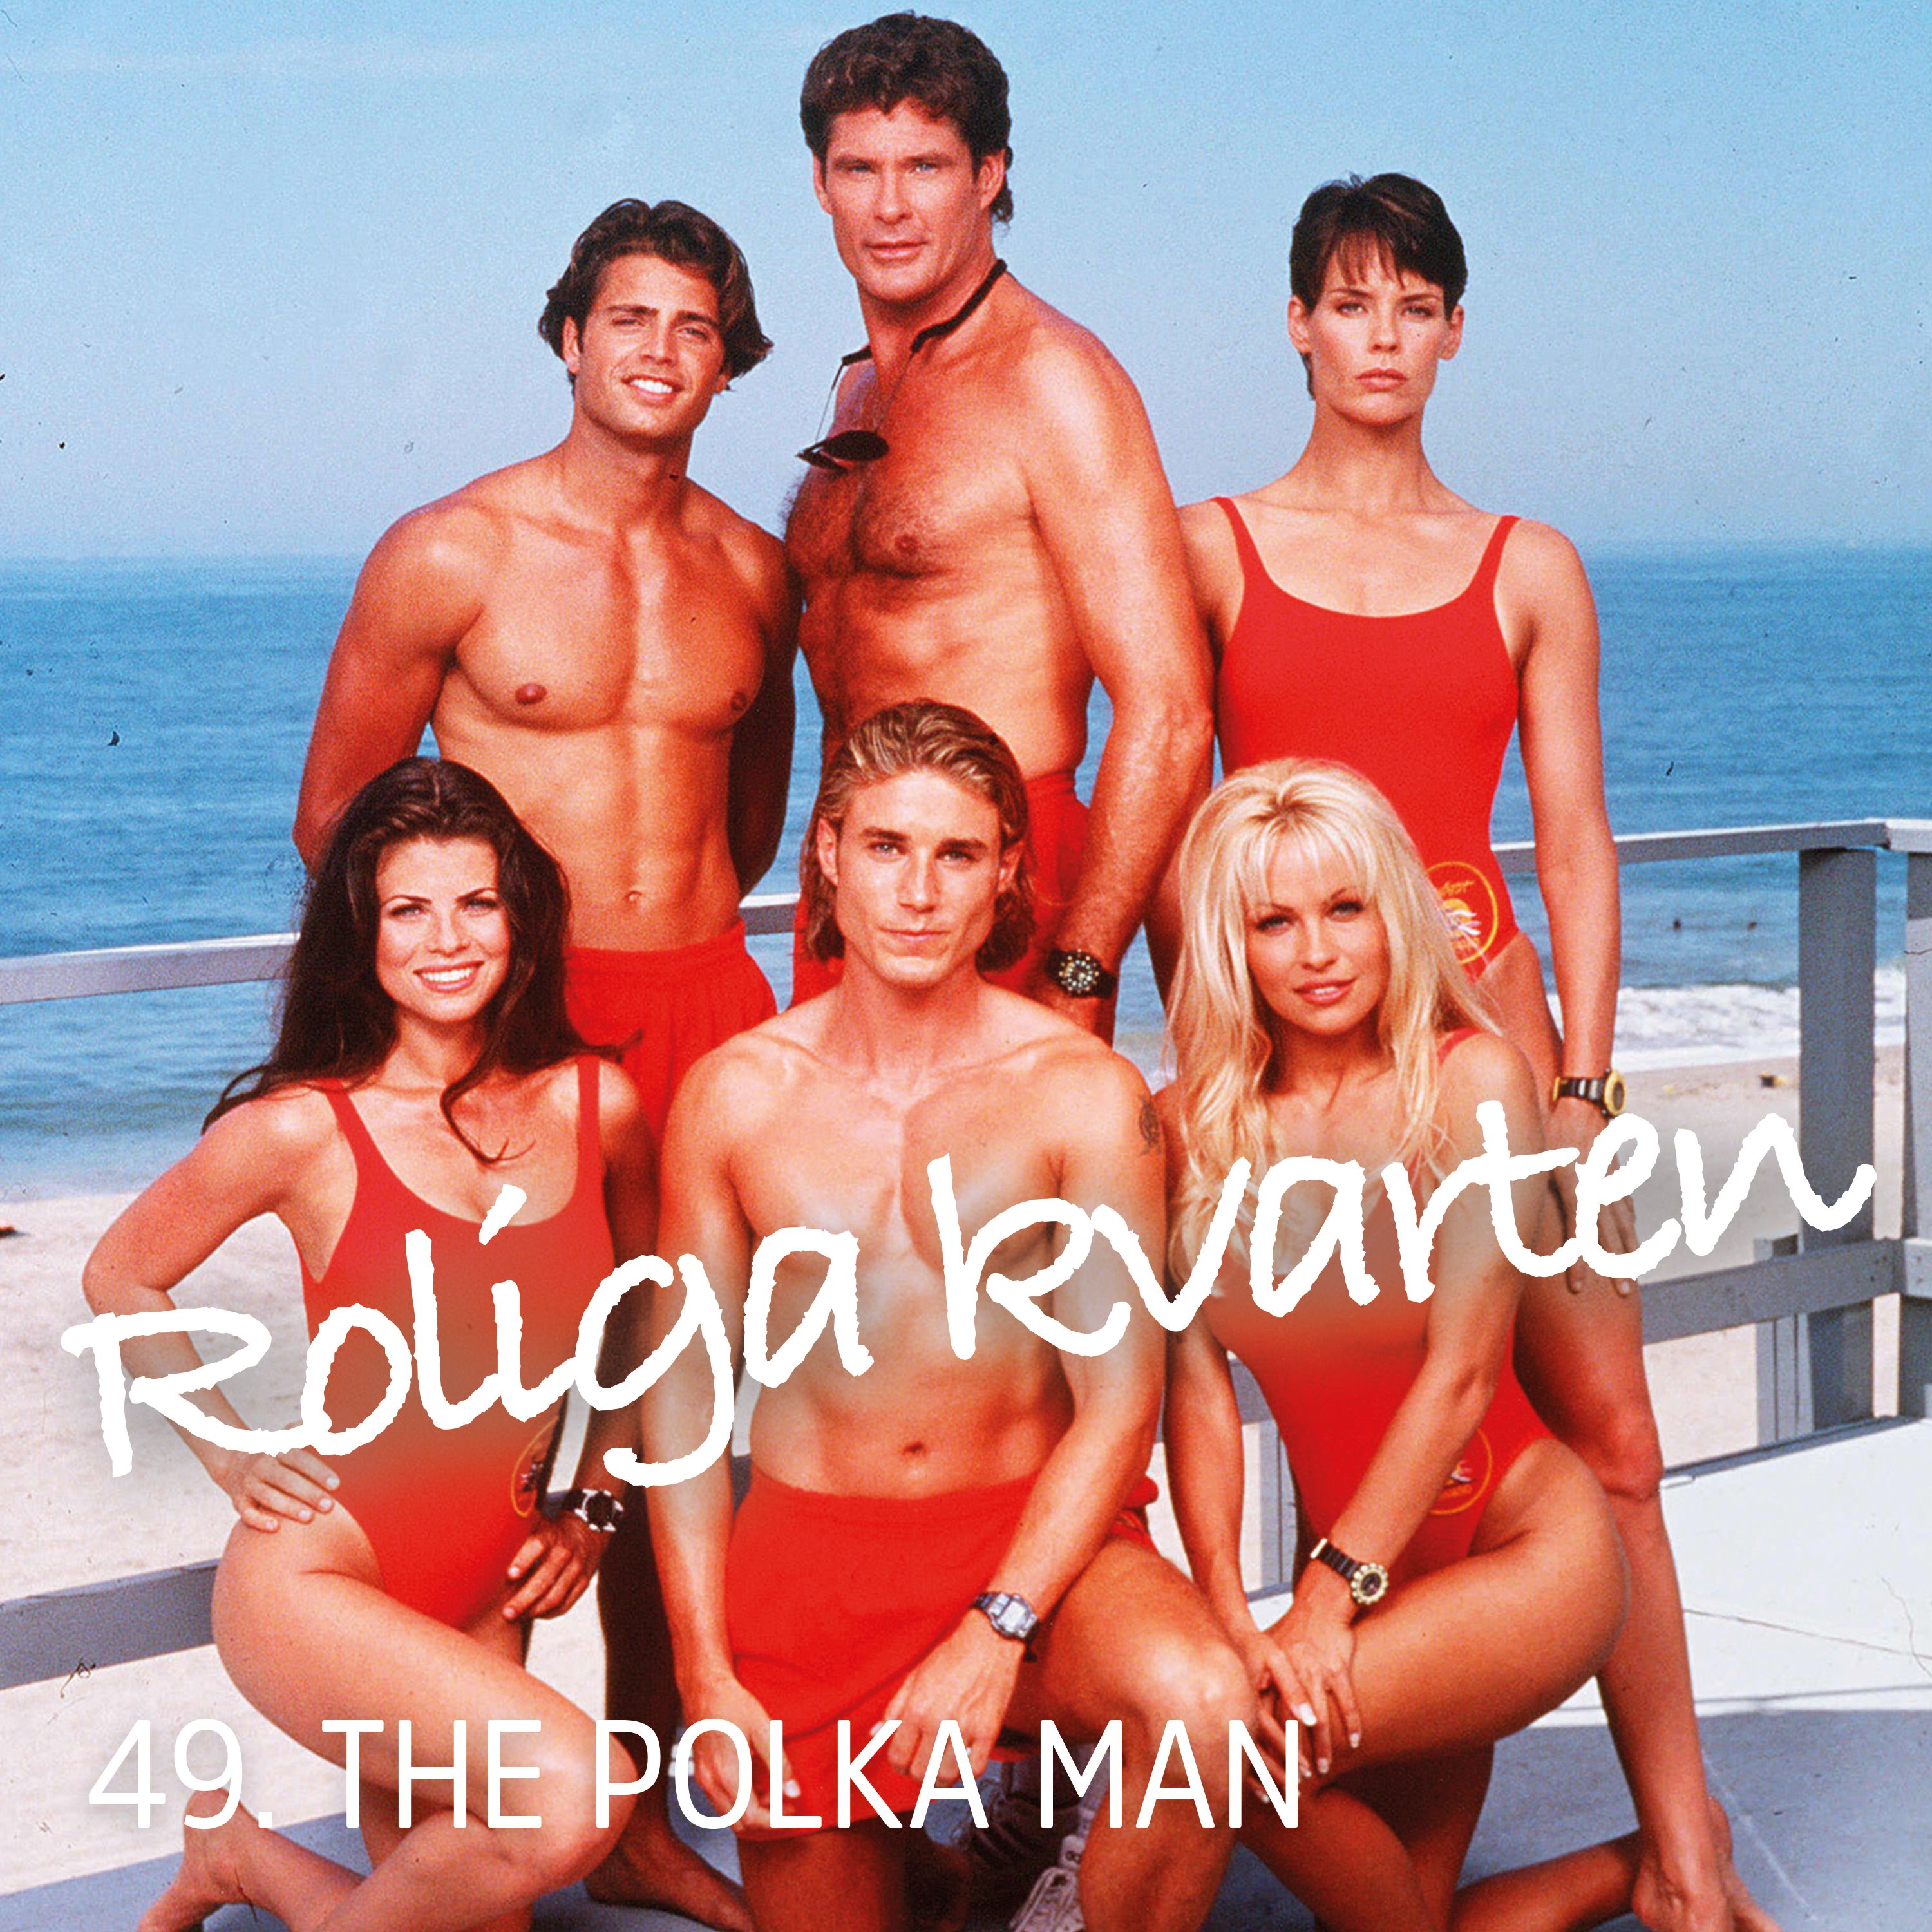 cover art for 49. The polka man